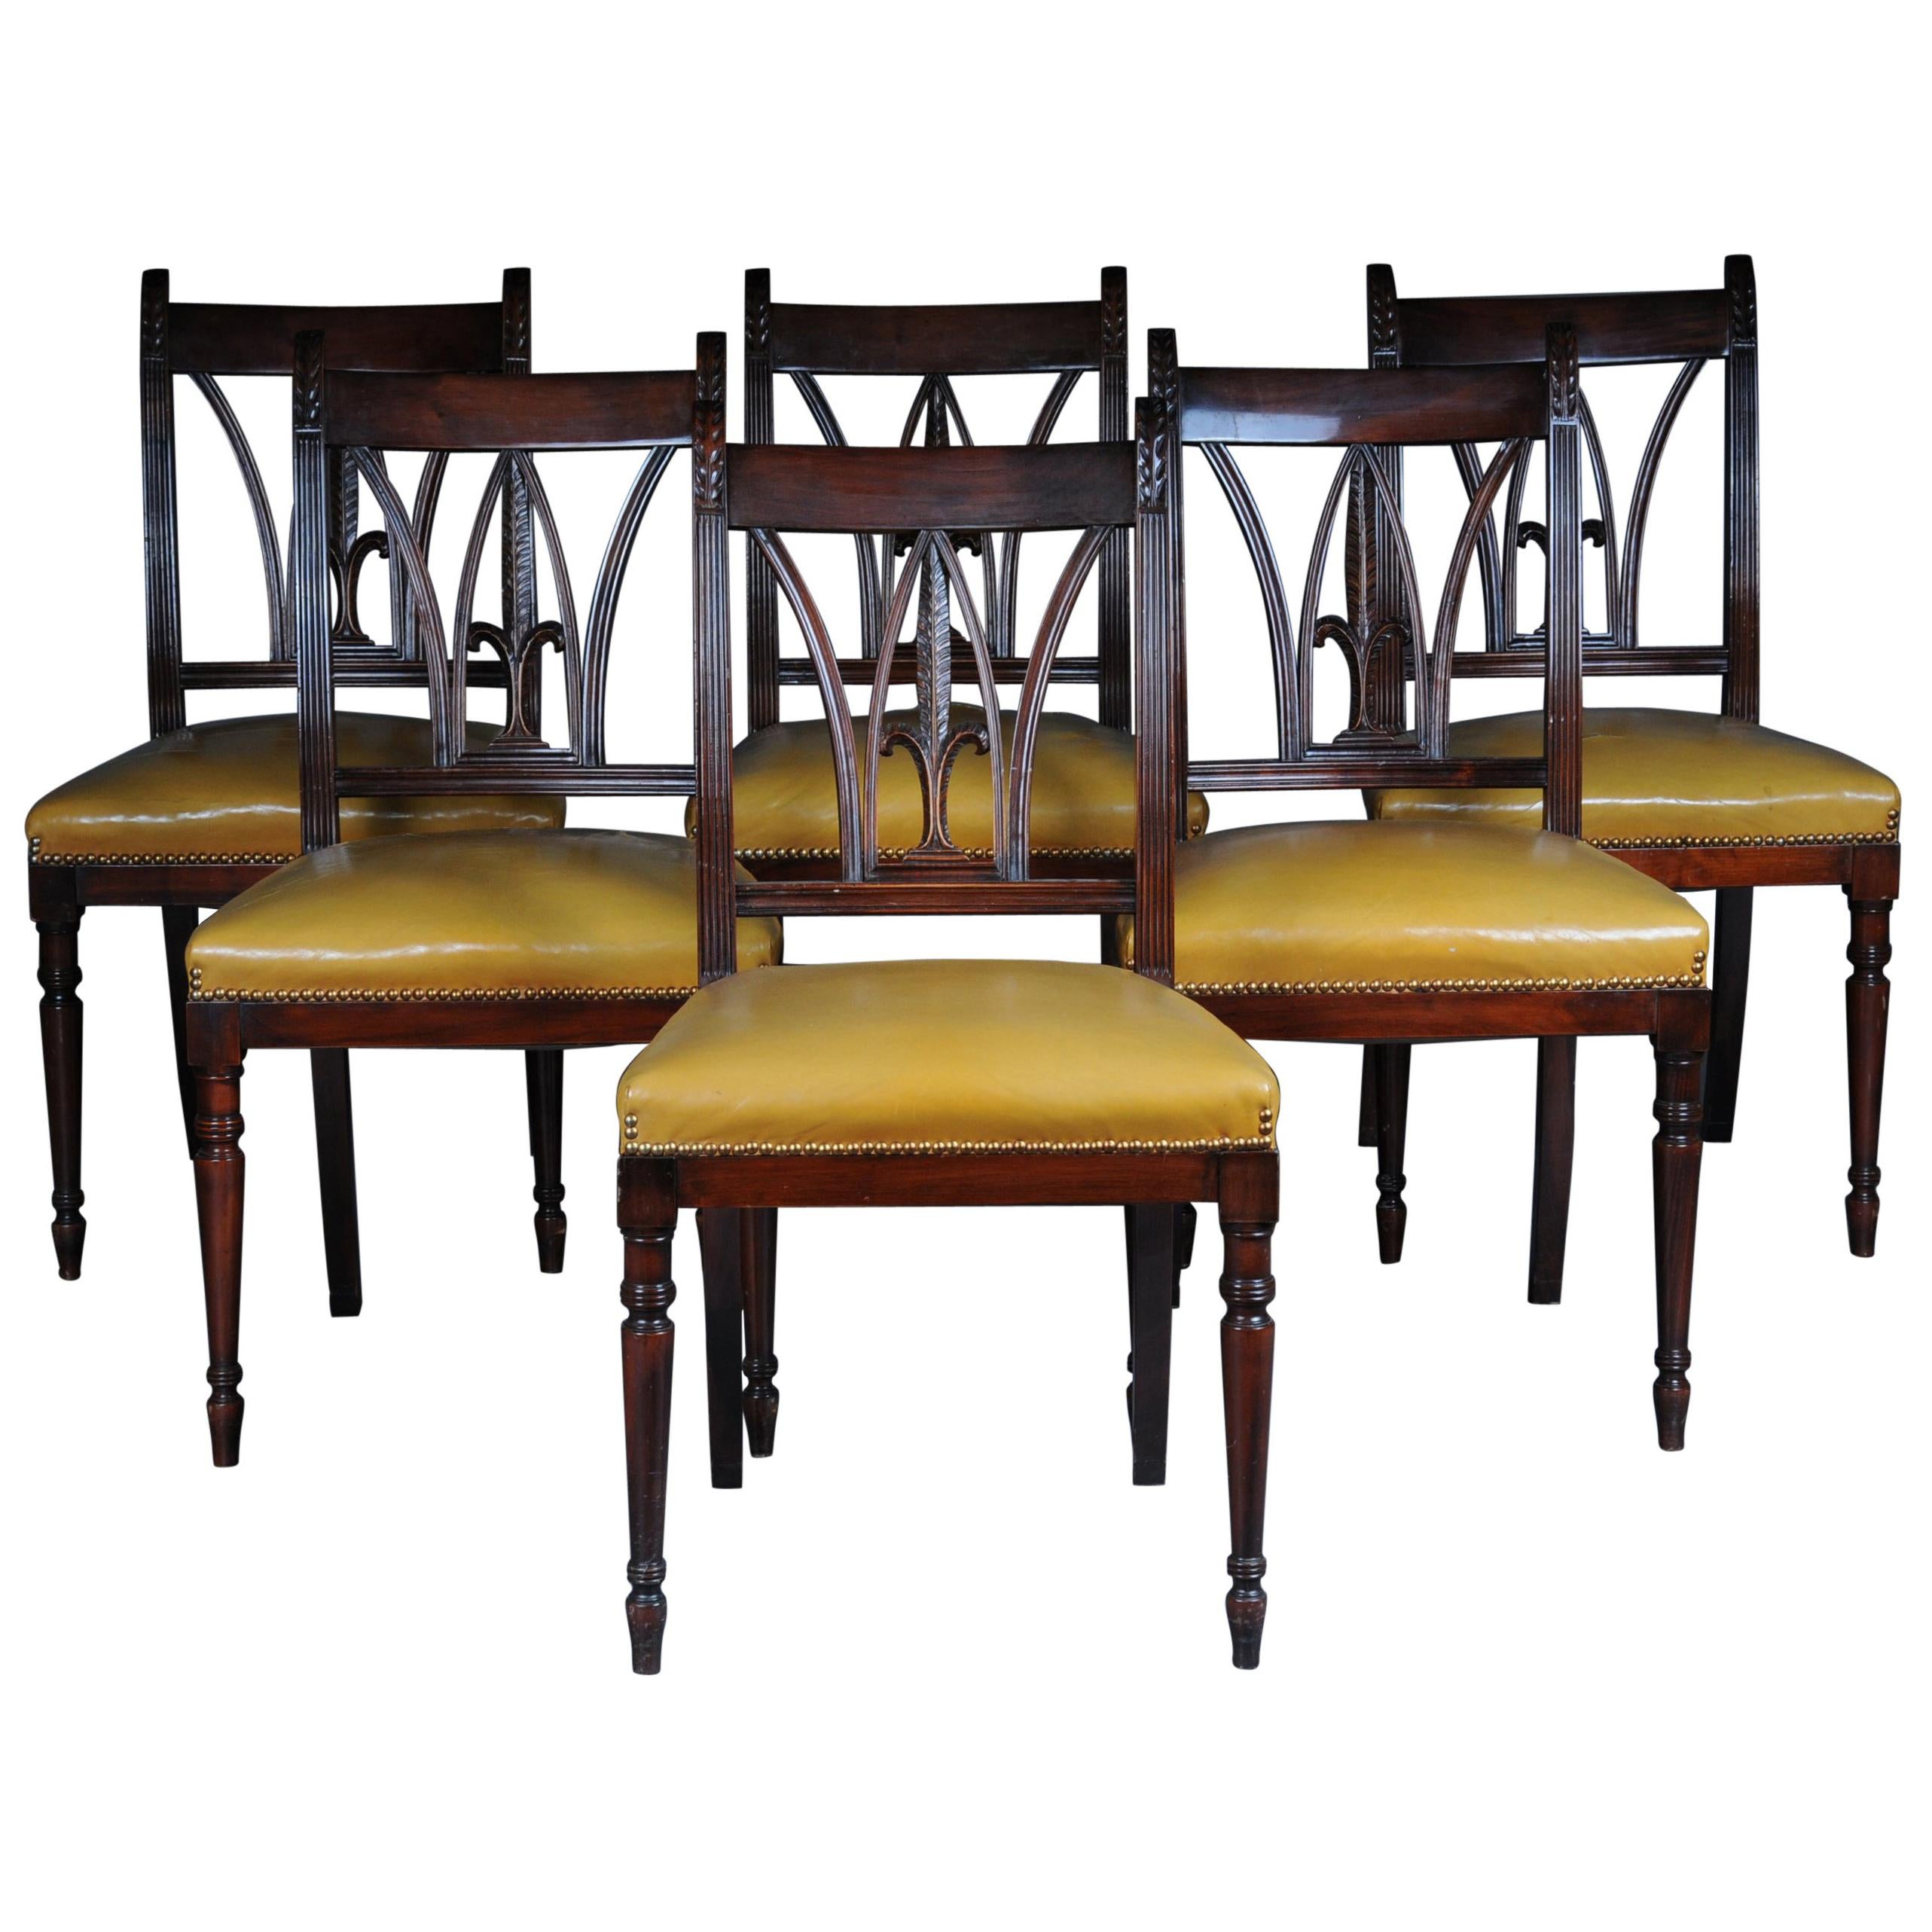 Set of Six Chairs England Victorian 20th Century, Mahogany, Leather For Sale